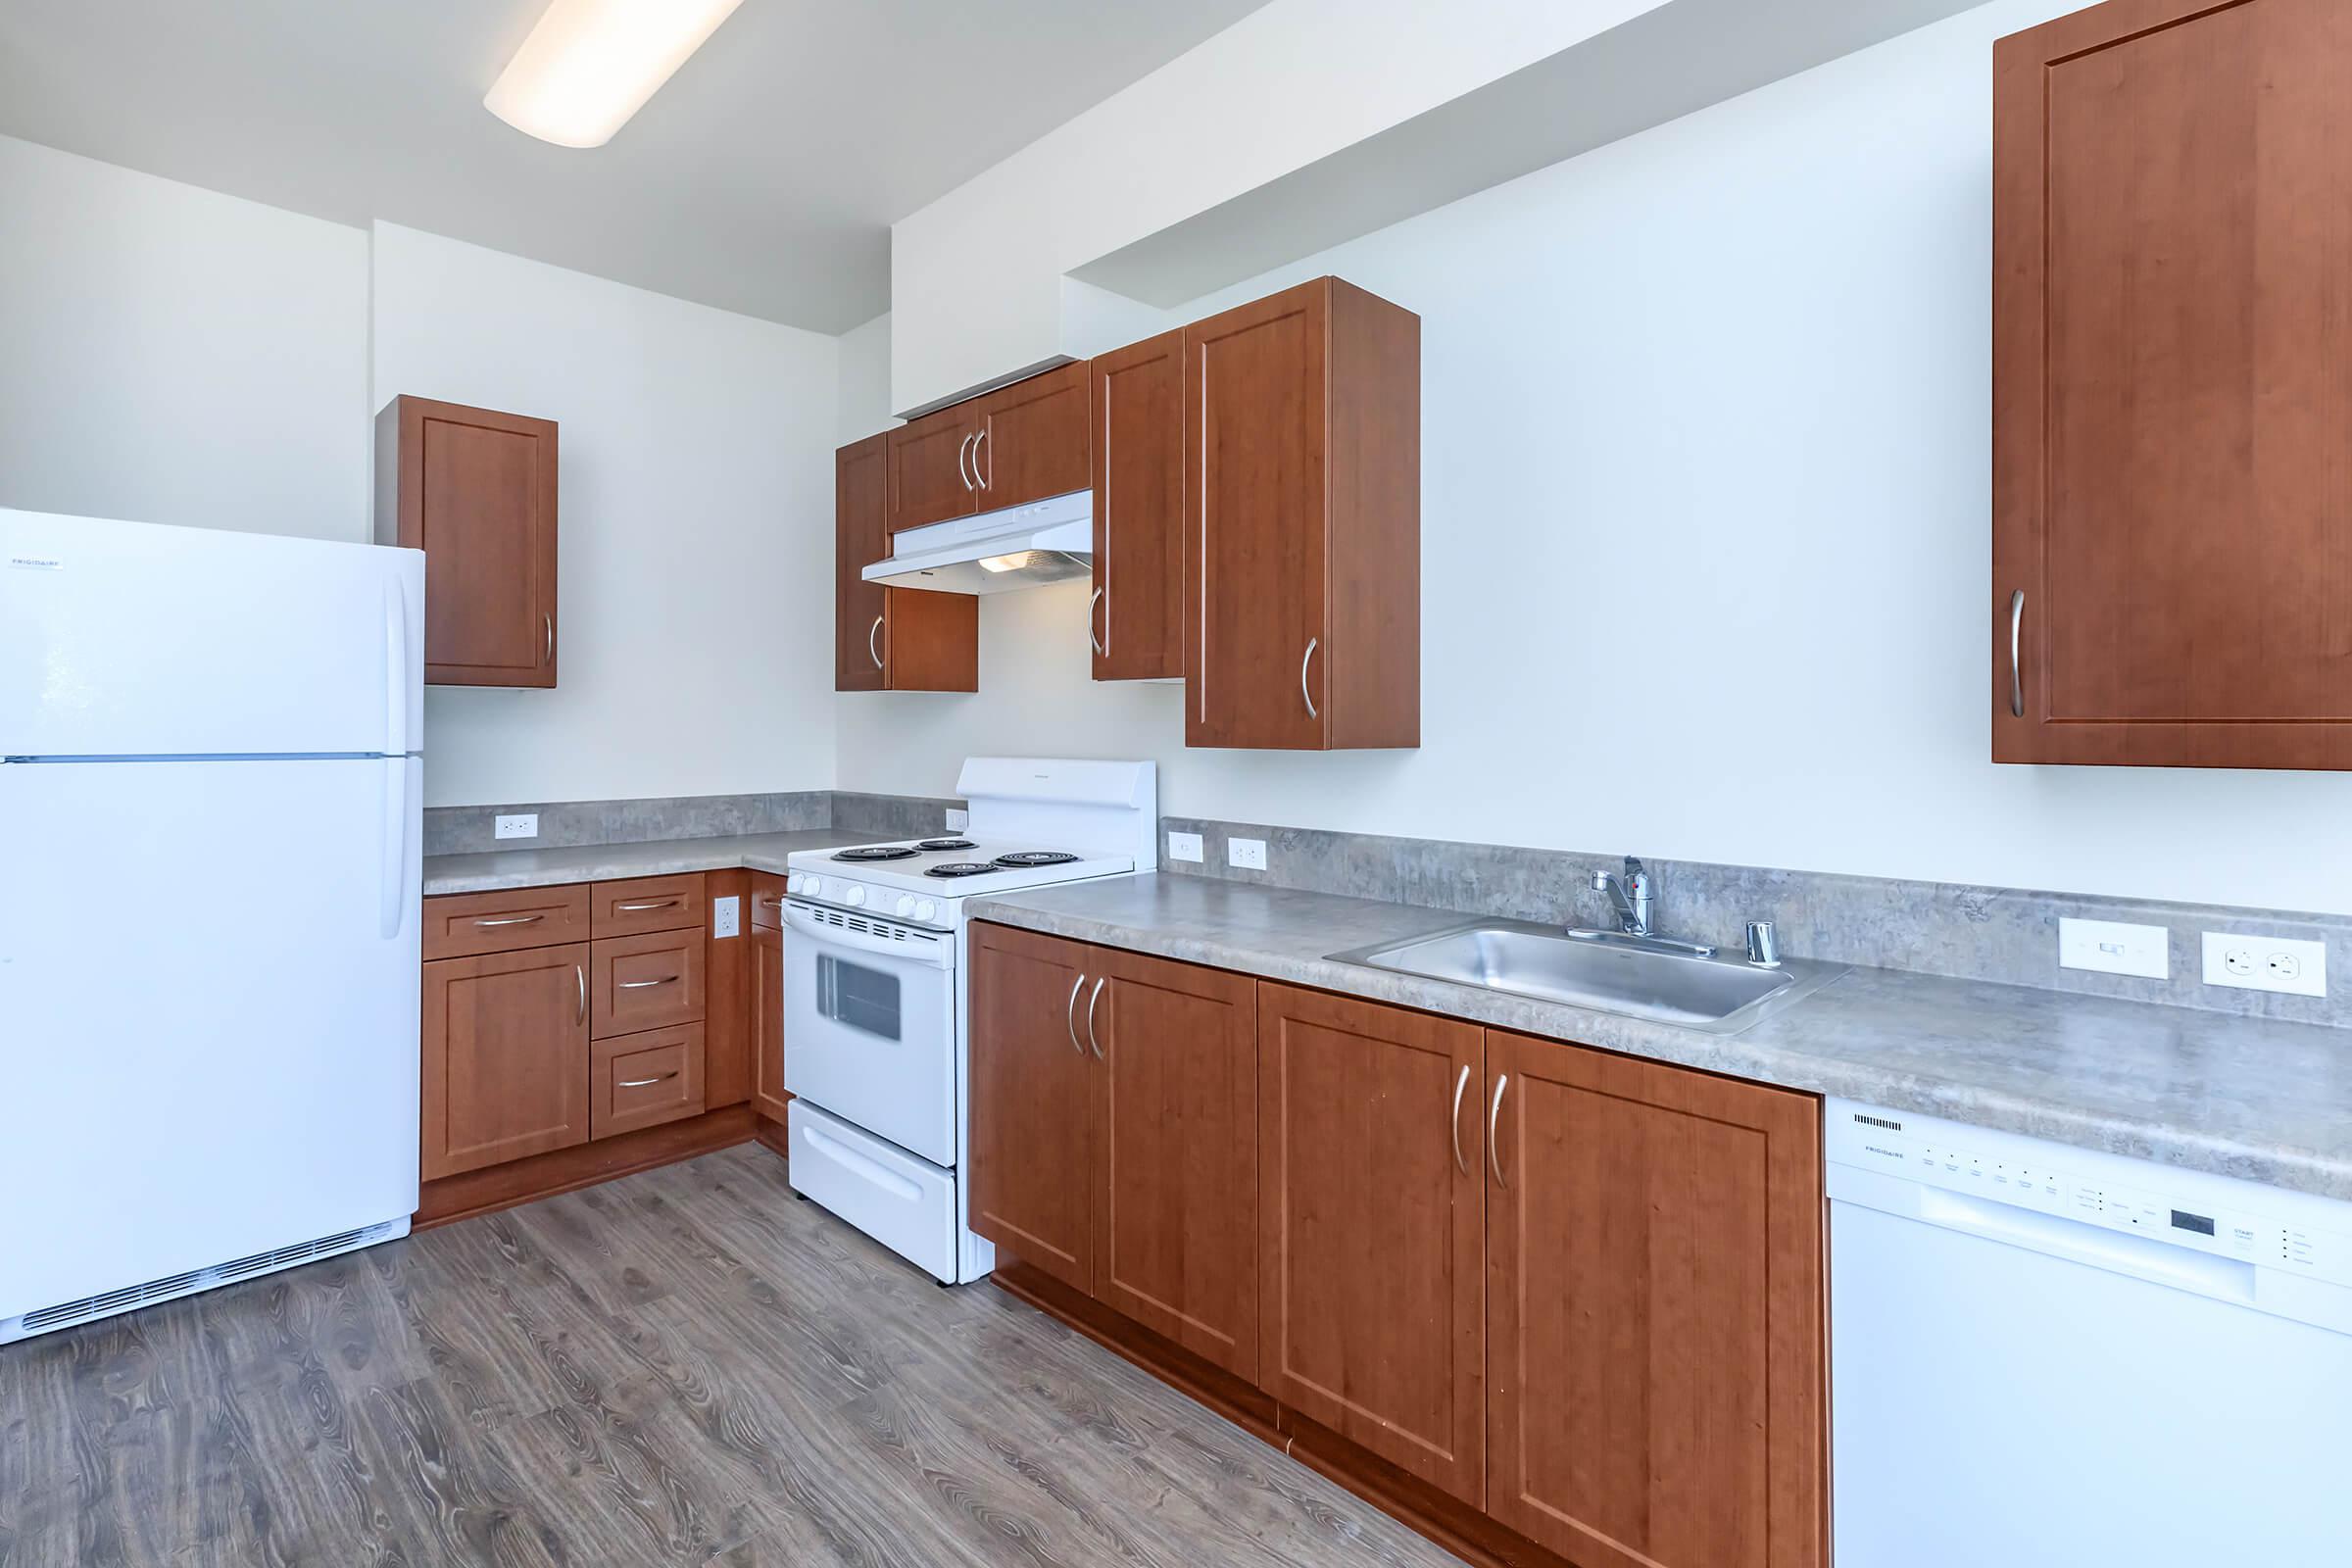 Kitchen - Unit includes Refrigerator, Electric Stove and Dishwasher.